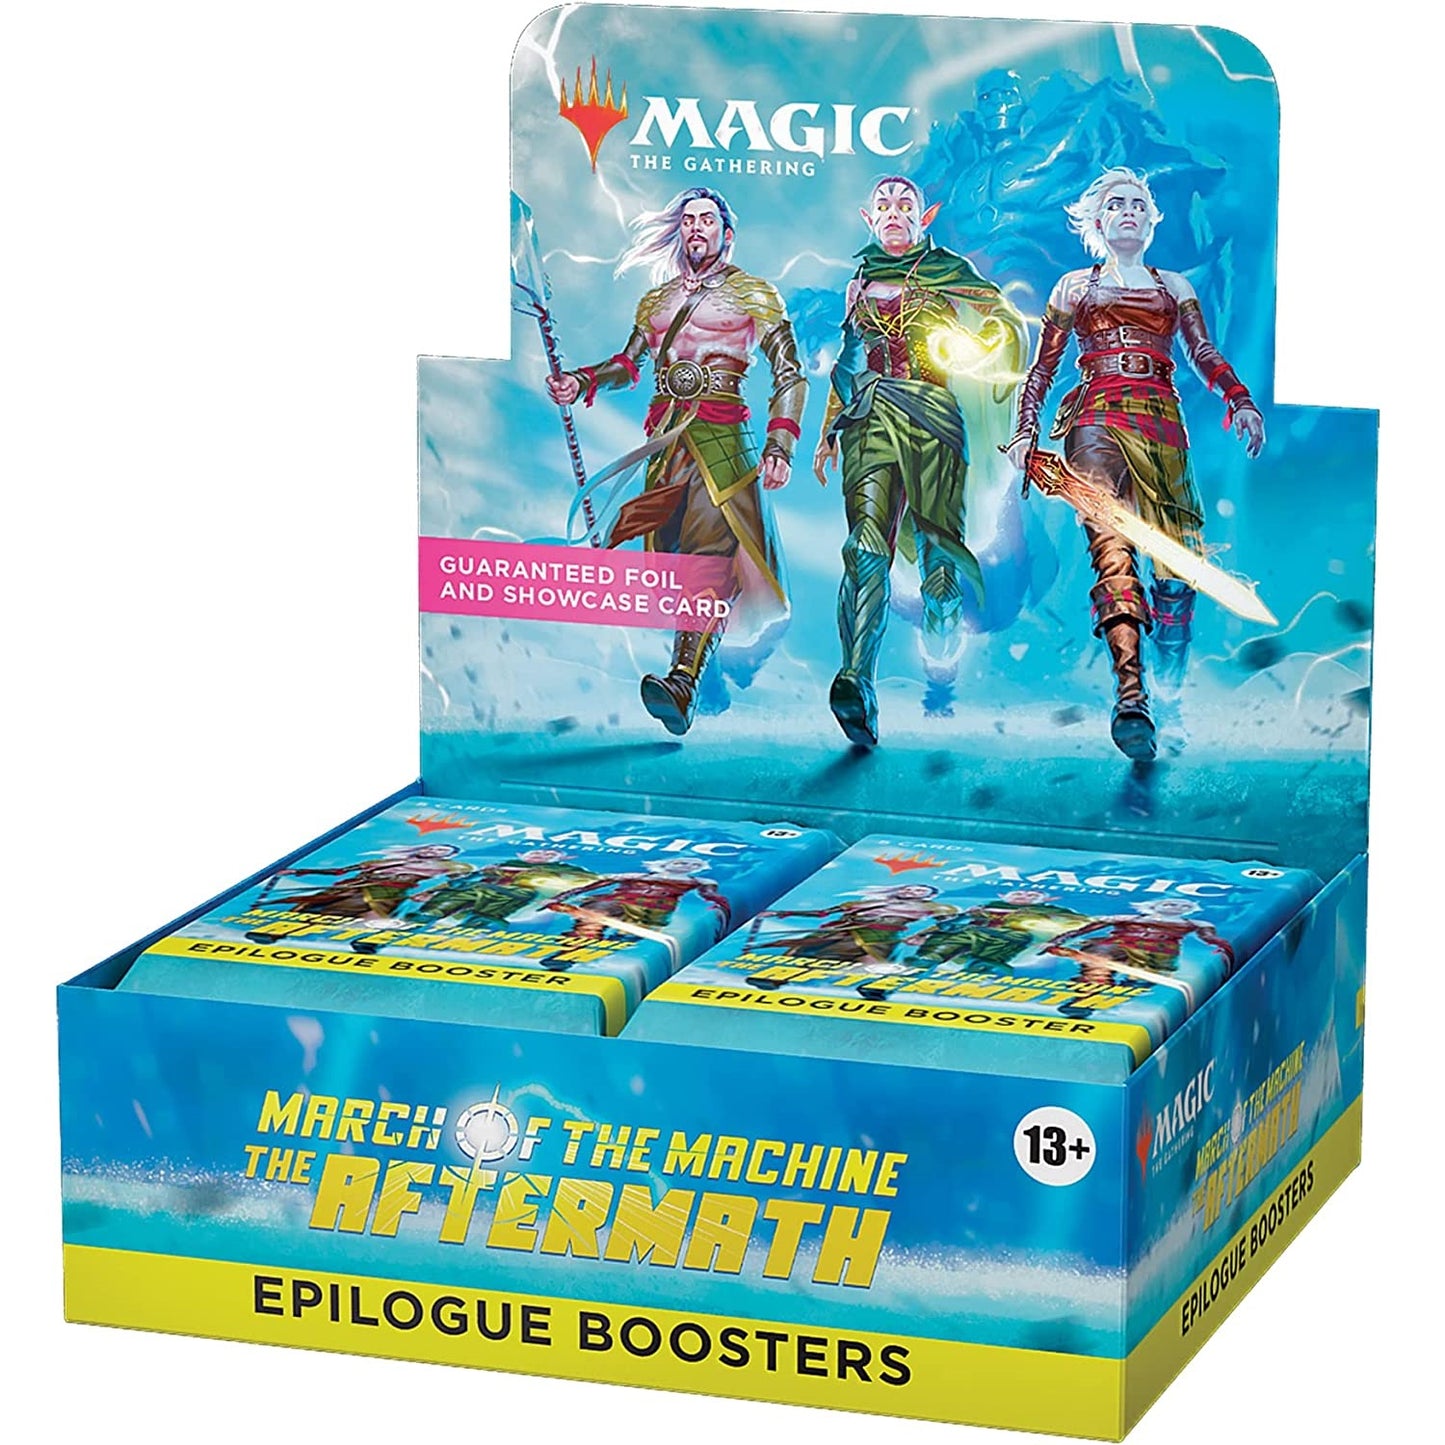 Magic: The Gathering: March of the Machine: The Aftermath Epilogue Booster Box